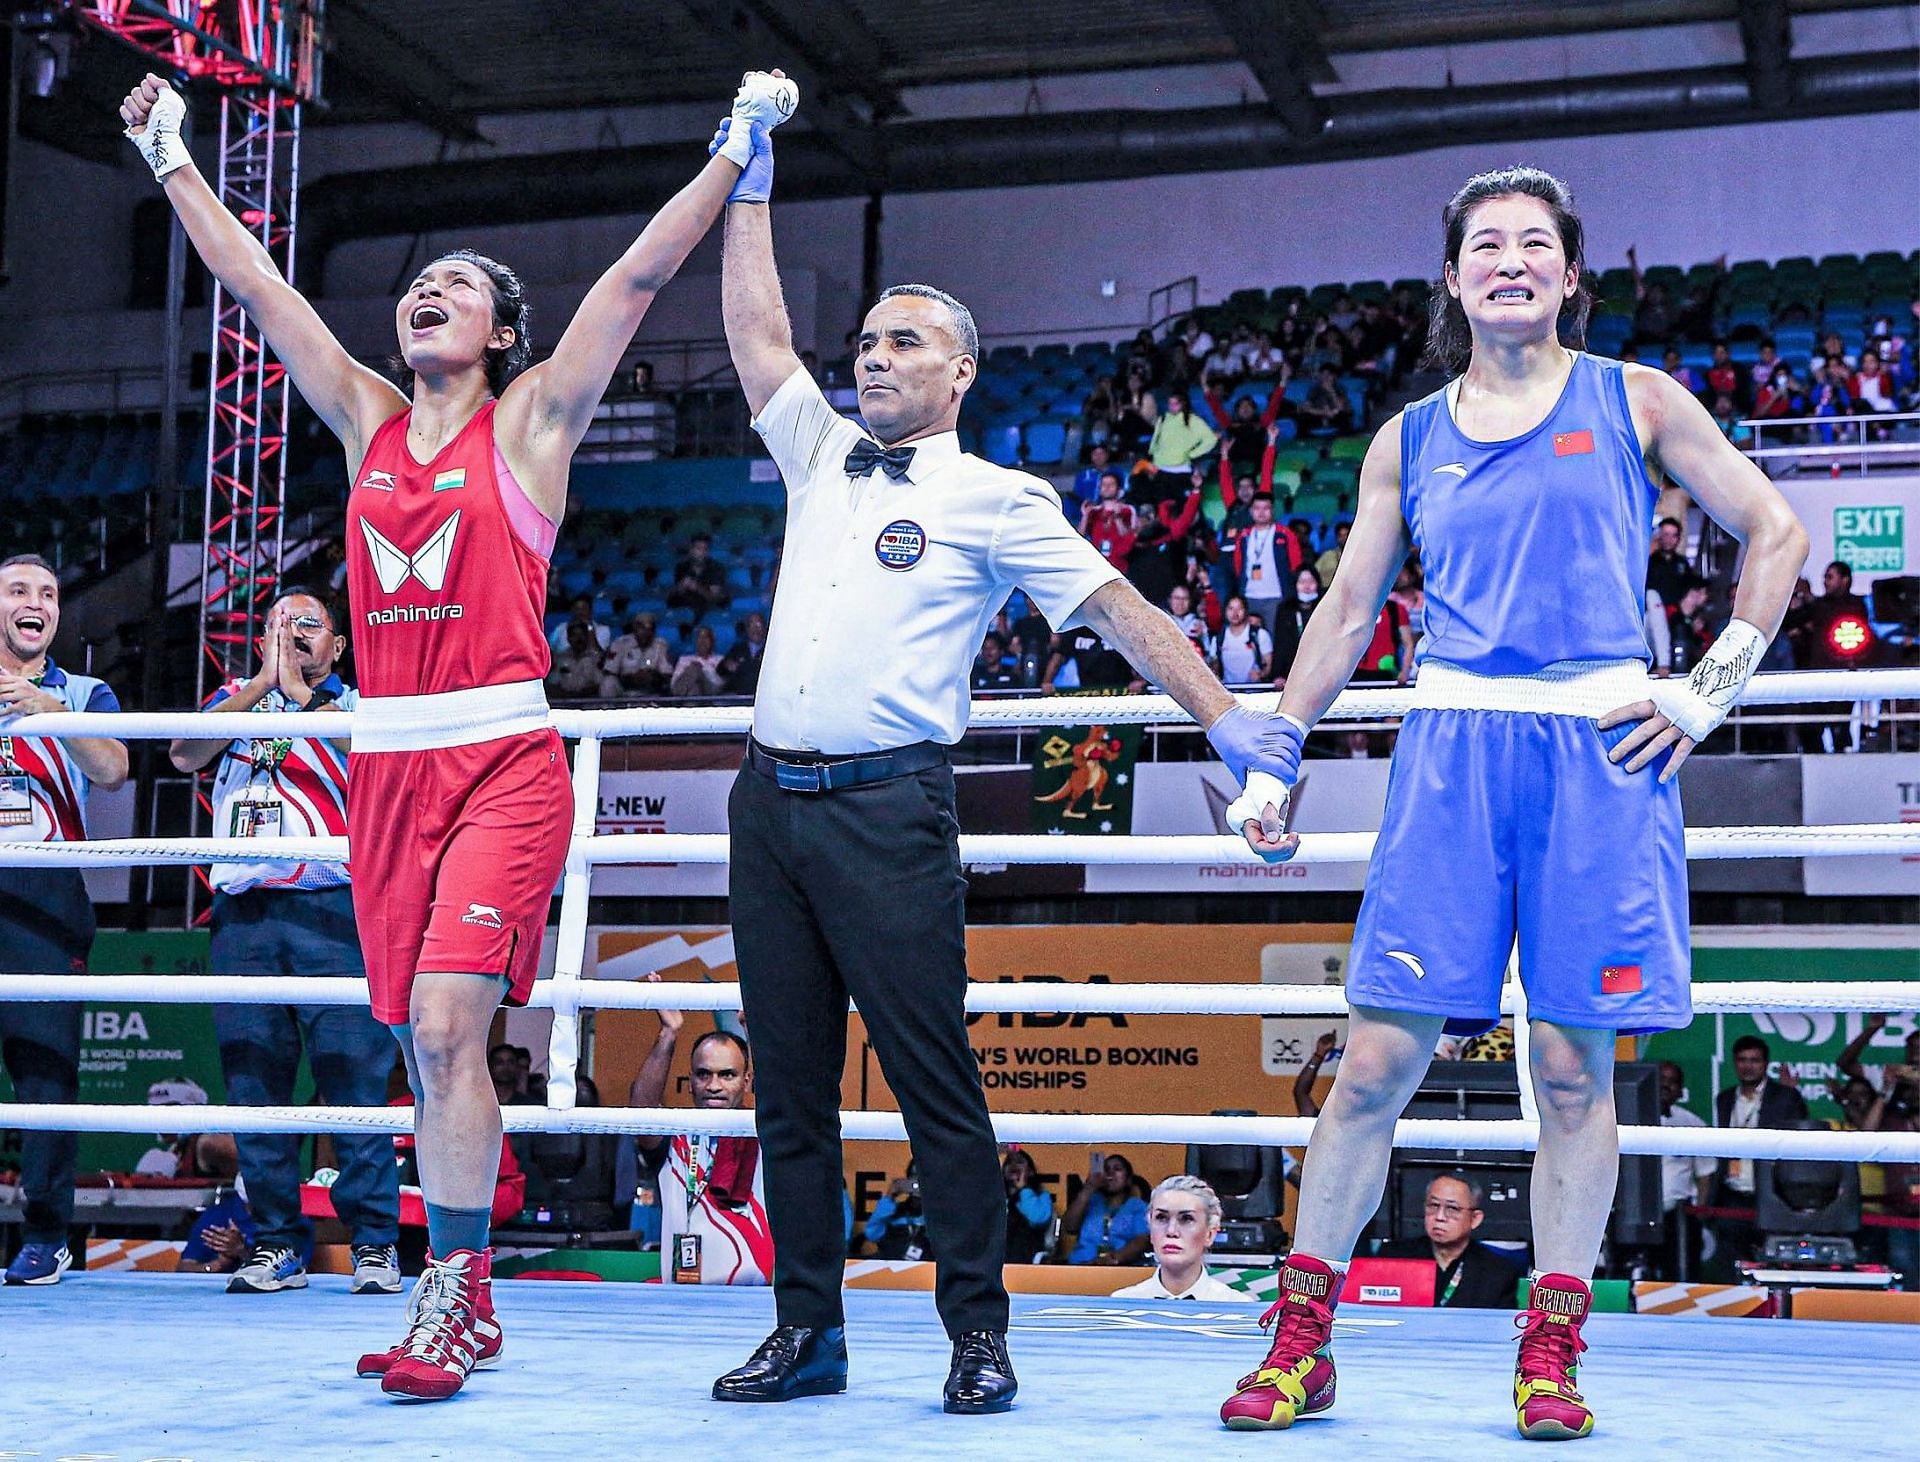 Lovlina Borgohain advanced to the gold medal round of the 75kg as she defeated China&rsquo;s Li Gian 4-1 in the semis of the IBA Women&rsquo;s World Boxing Championships. Photo credit IBA.